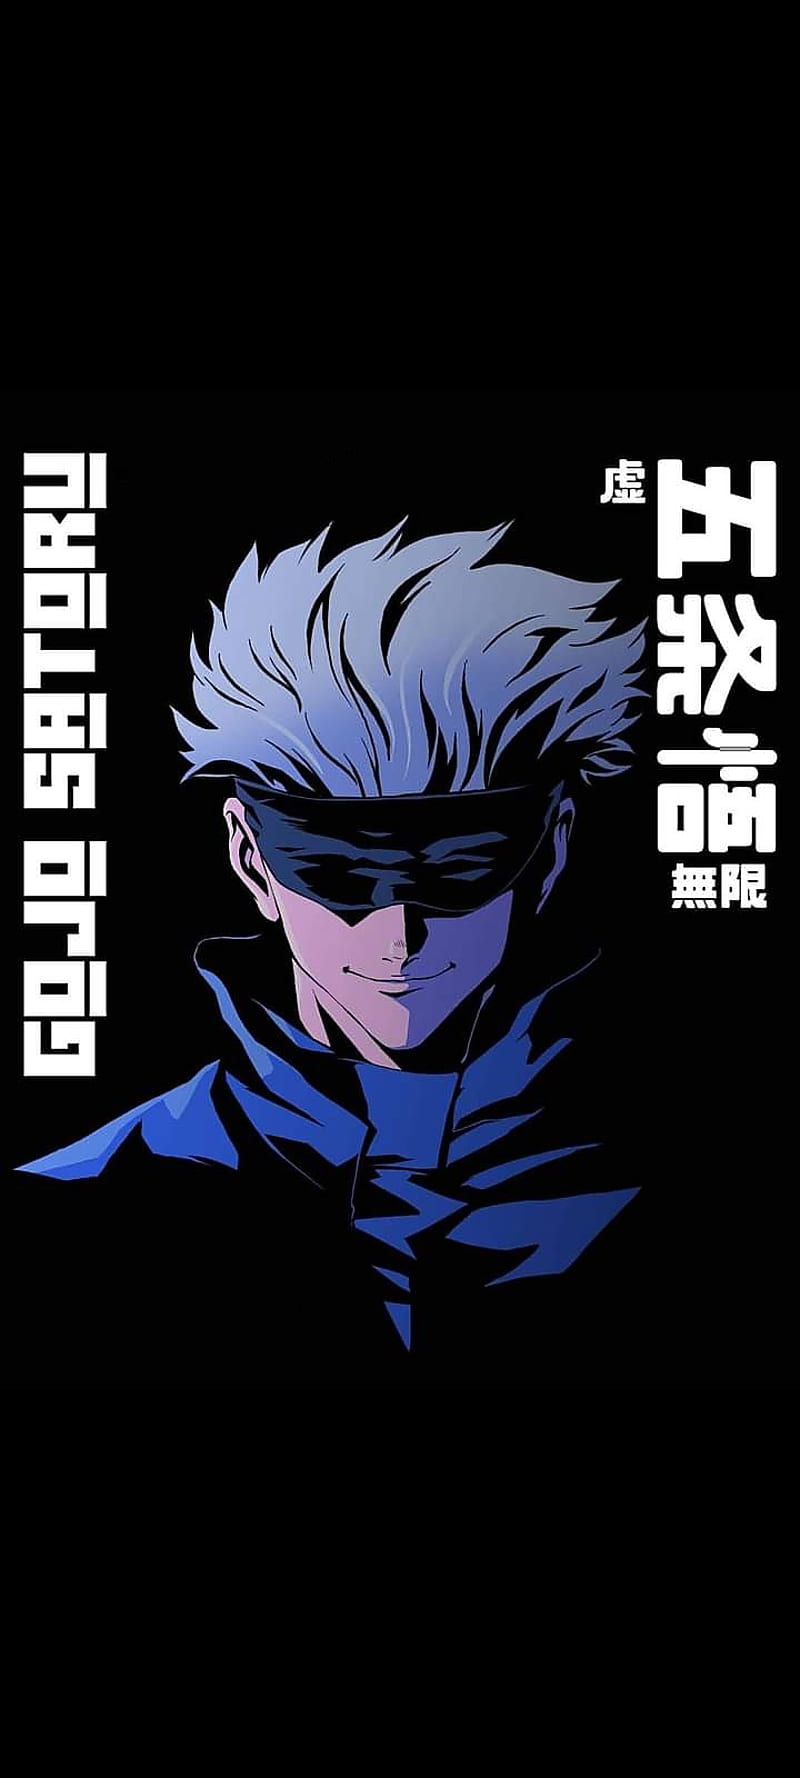 Jujutsu Kaisen already confirmed how Gojo could return, but nobody noticed